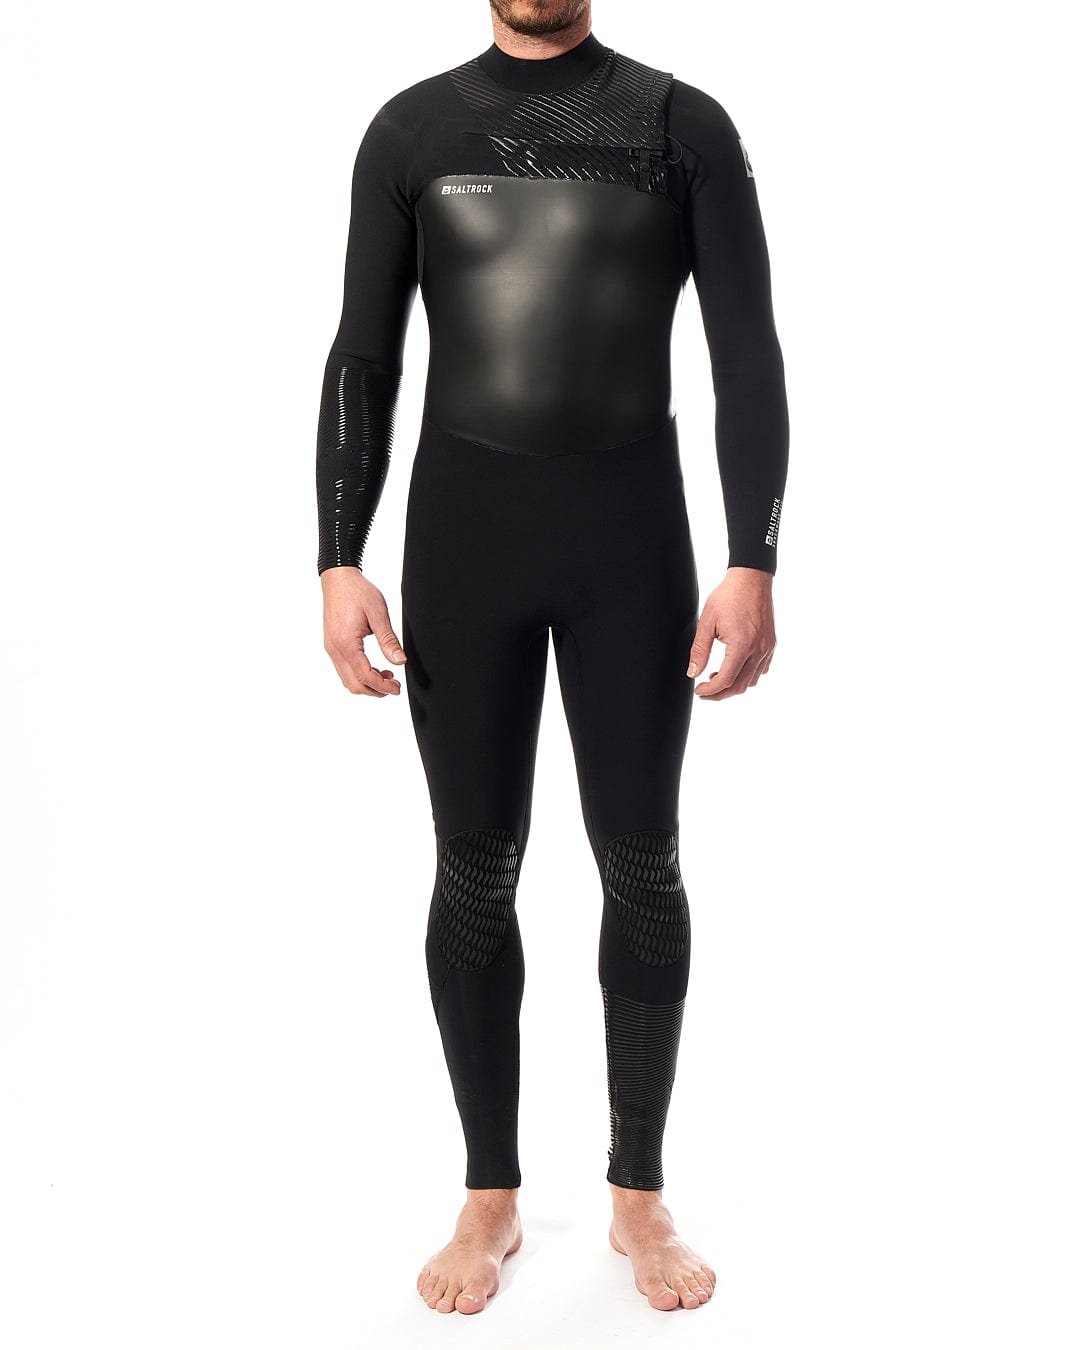 A man in a Saltrock Shockwave - Mens 3/2 Chest Zip Full Wetsuit - Black standing in front of a white background.